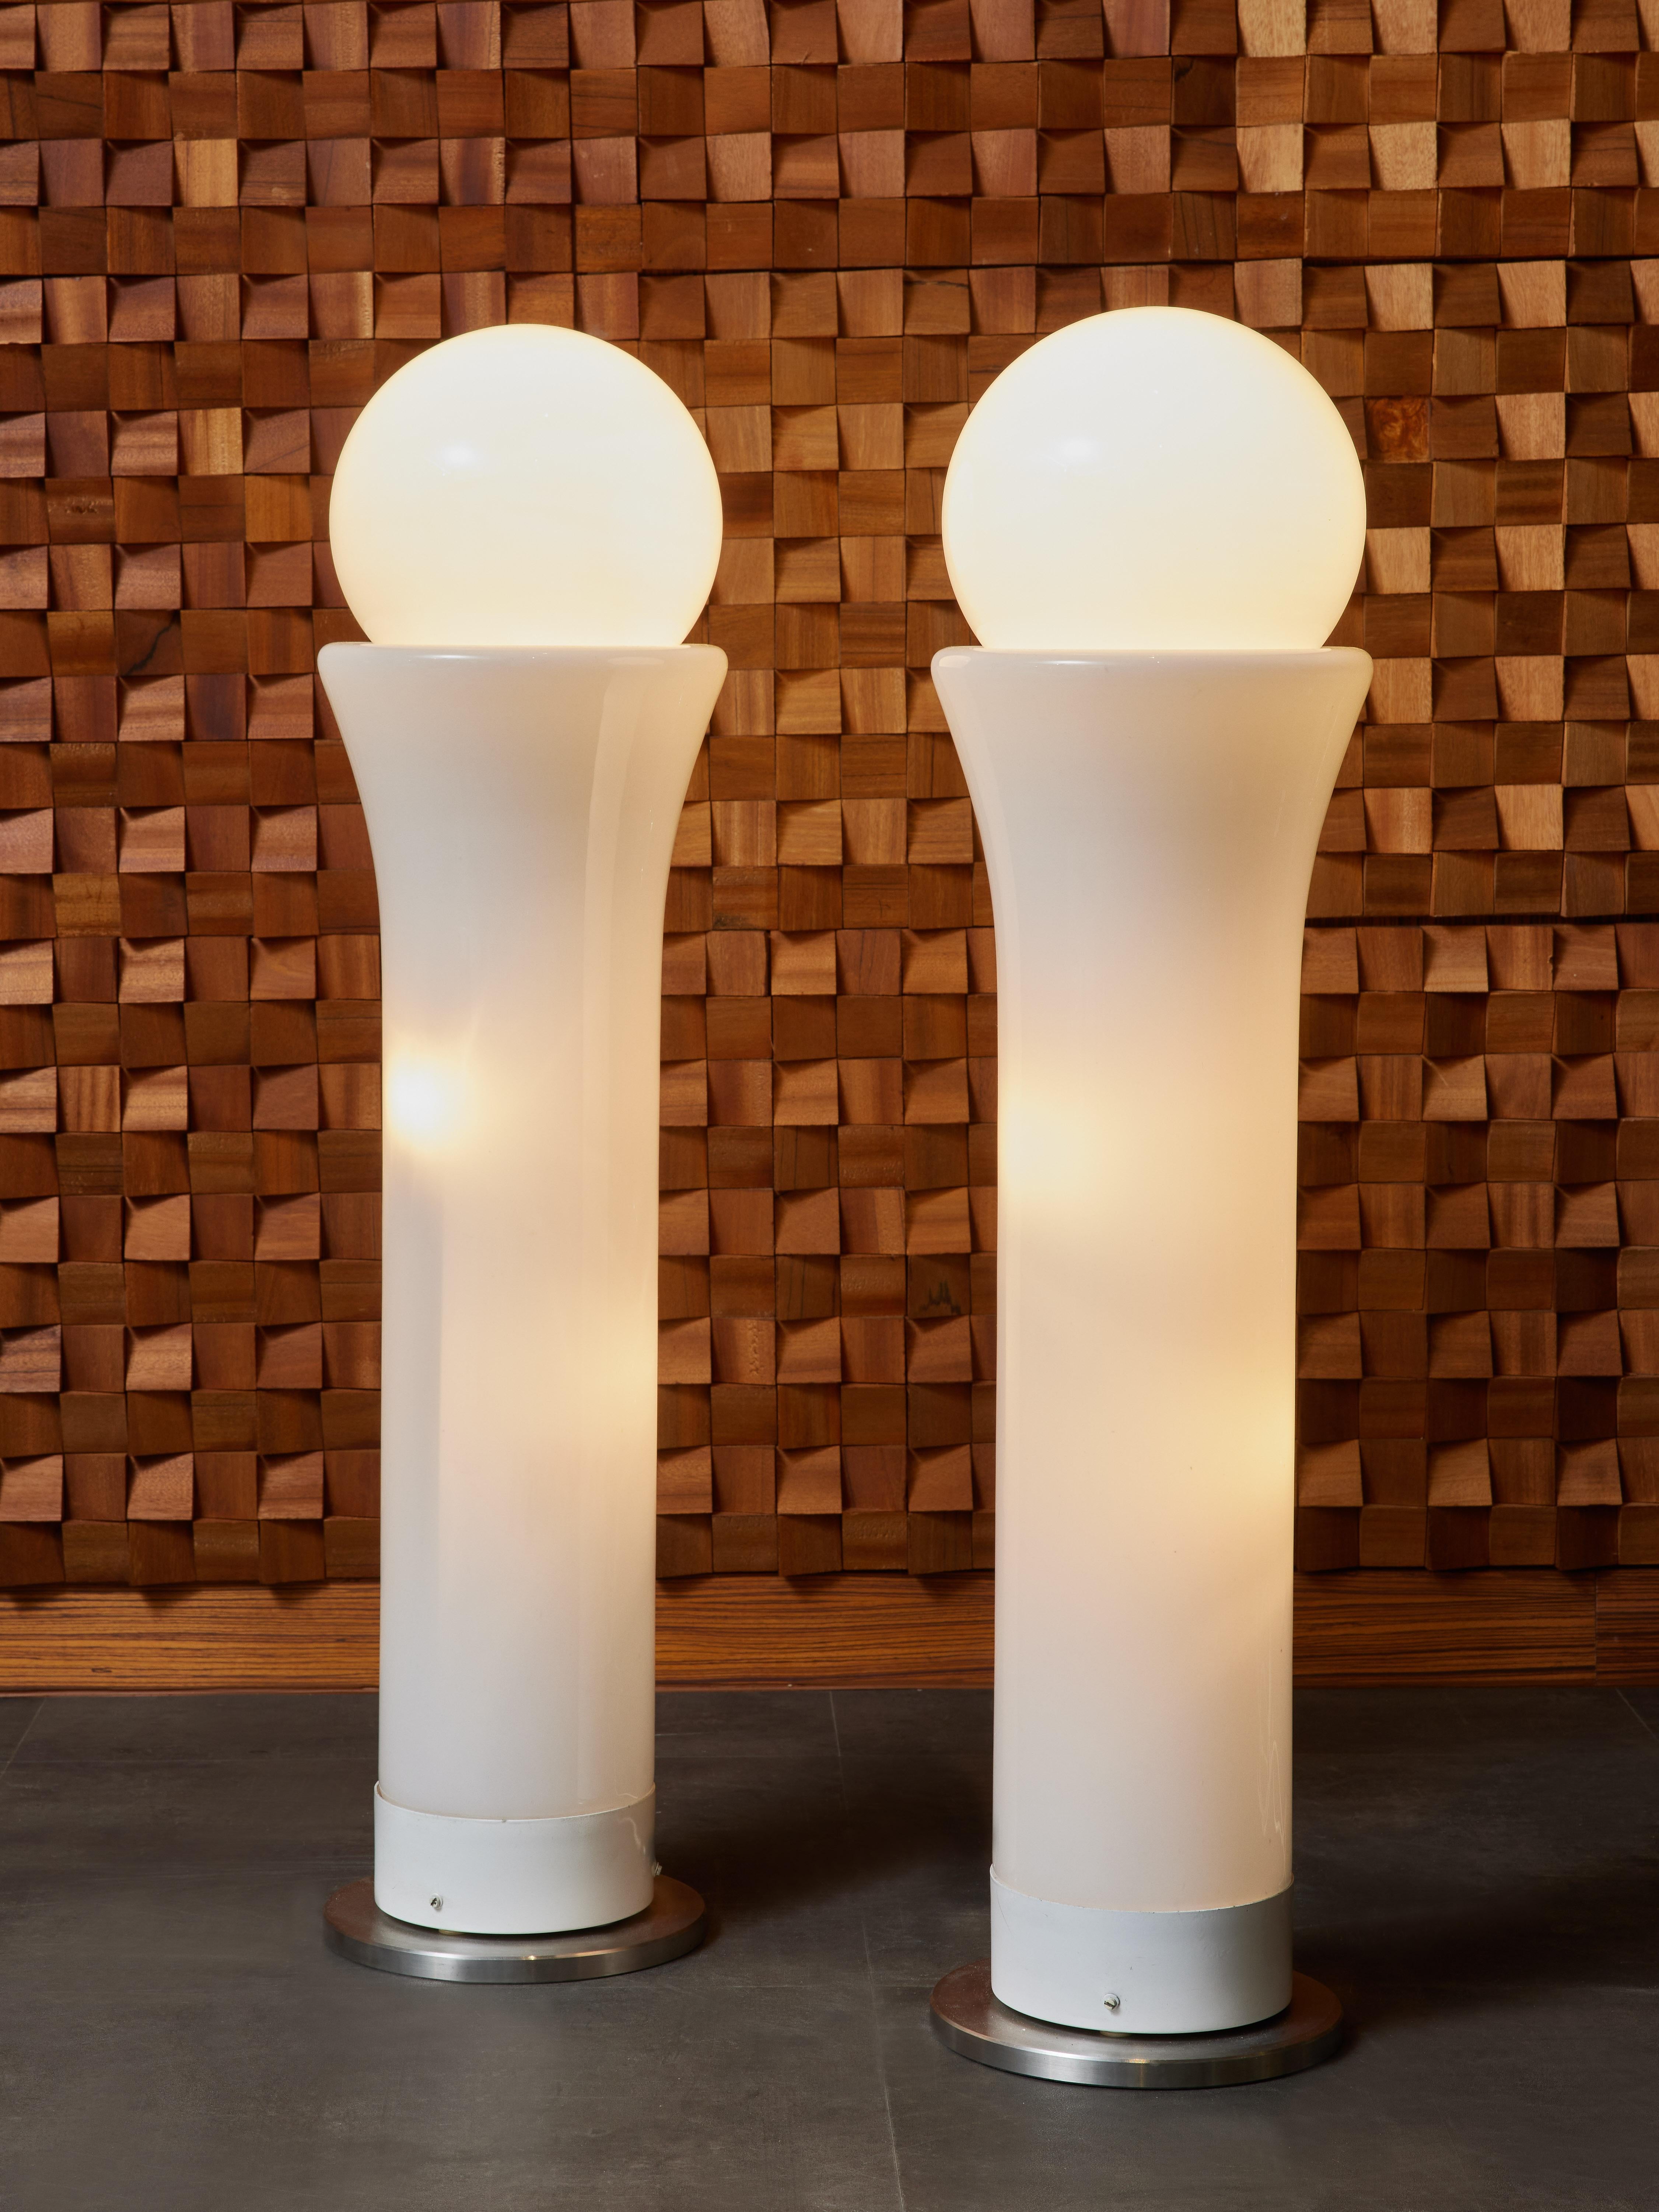 Pair of vintage floor lamps designed by Vistosi, made of an aluminum and opaline glass.
There several sources of lights, in the main body and in the top globe, fitted in the top of the vertical structure. 

